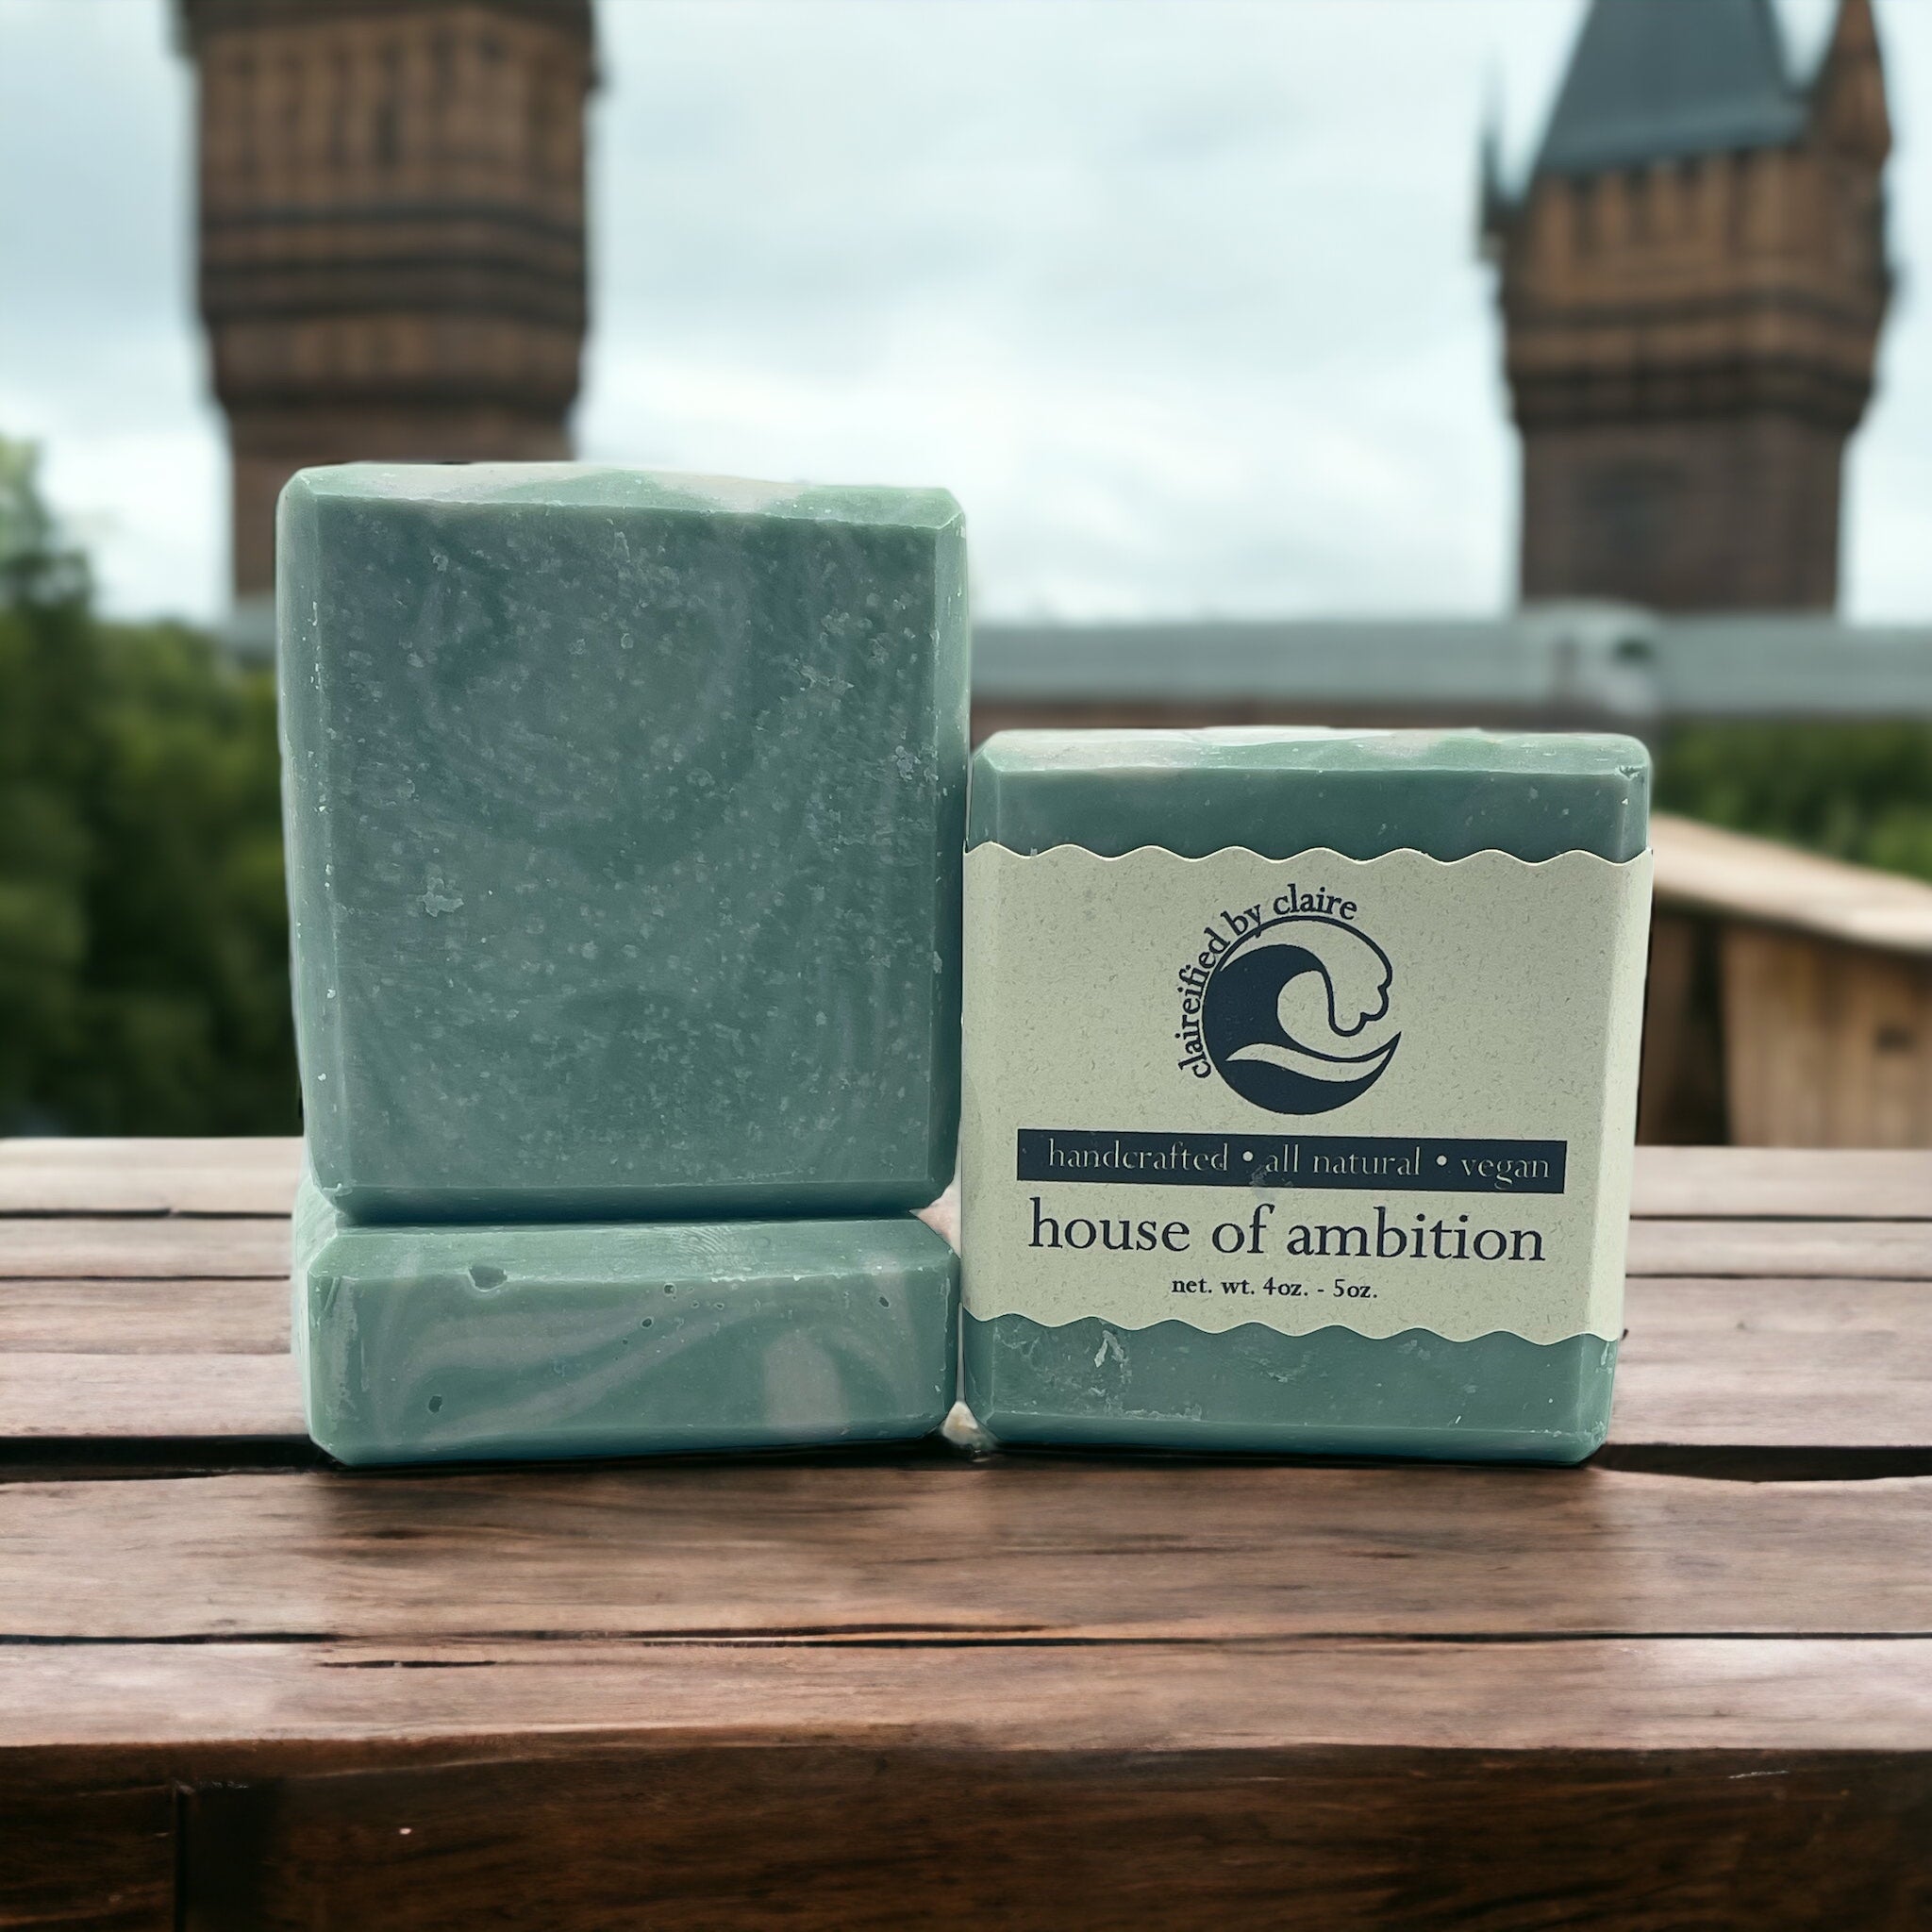 House of Ambition handmade soap inspired by Slytherin house from Harry Potter